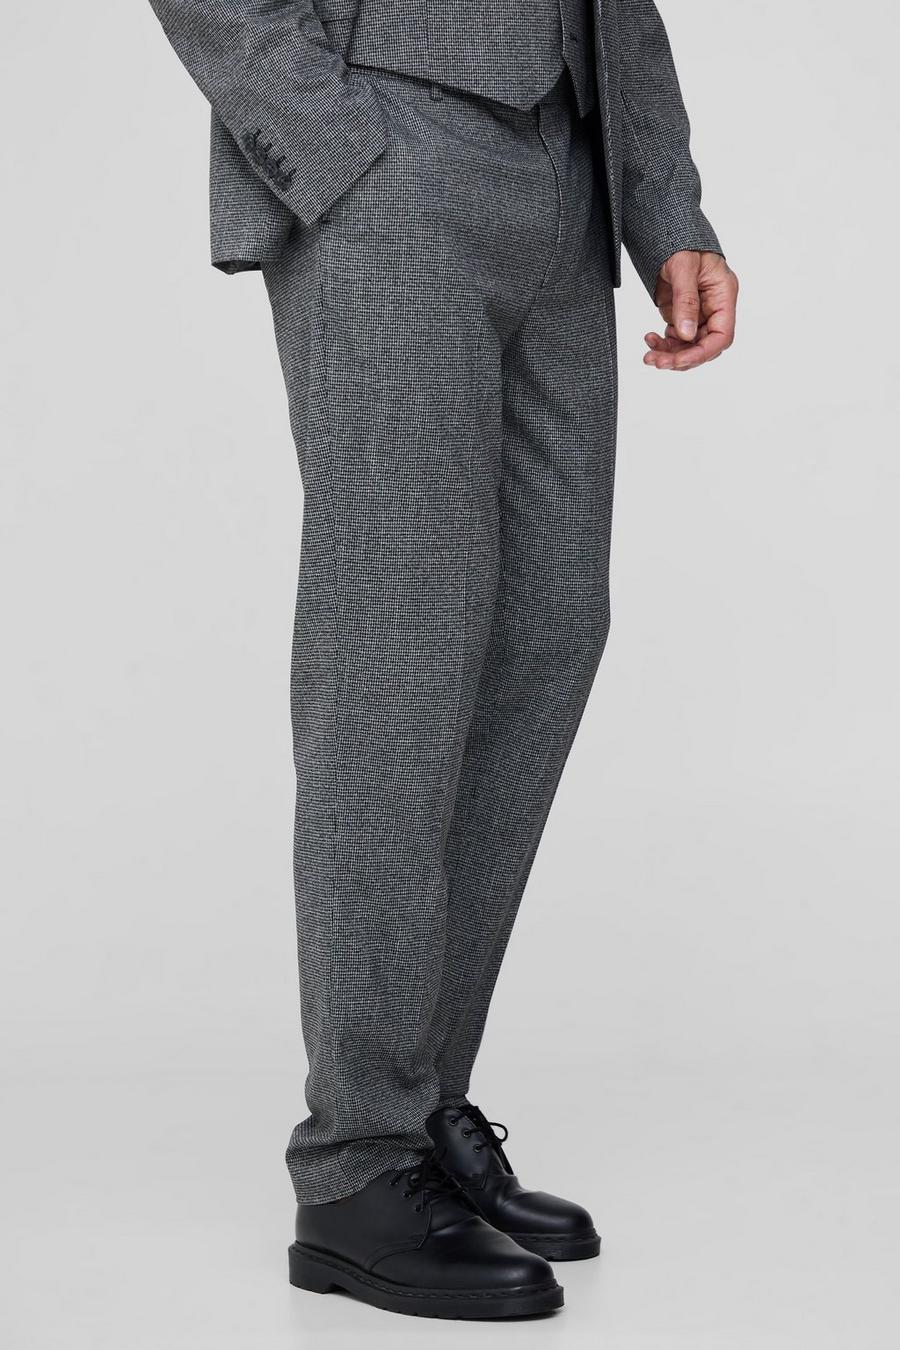 Grey Tall Mini Dogtooth Slim Fit Suit Trouser